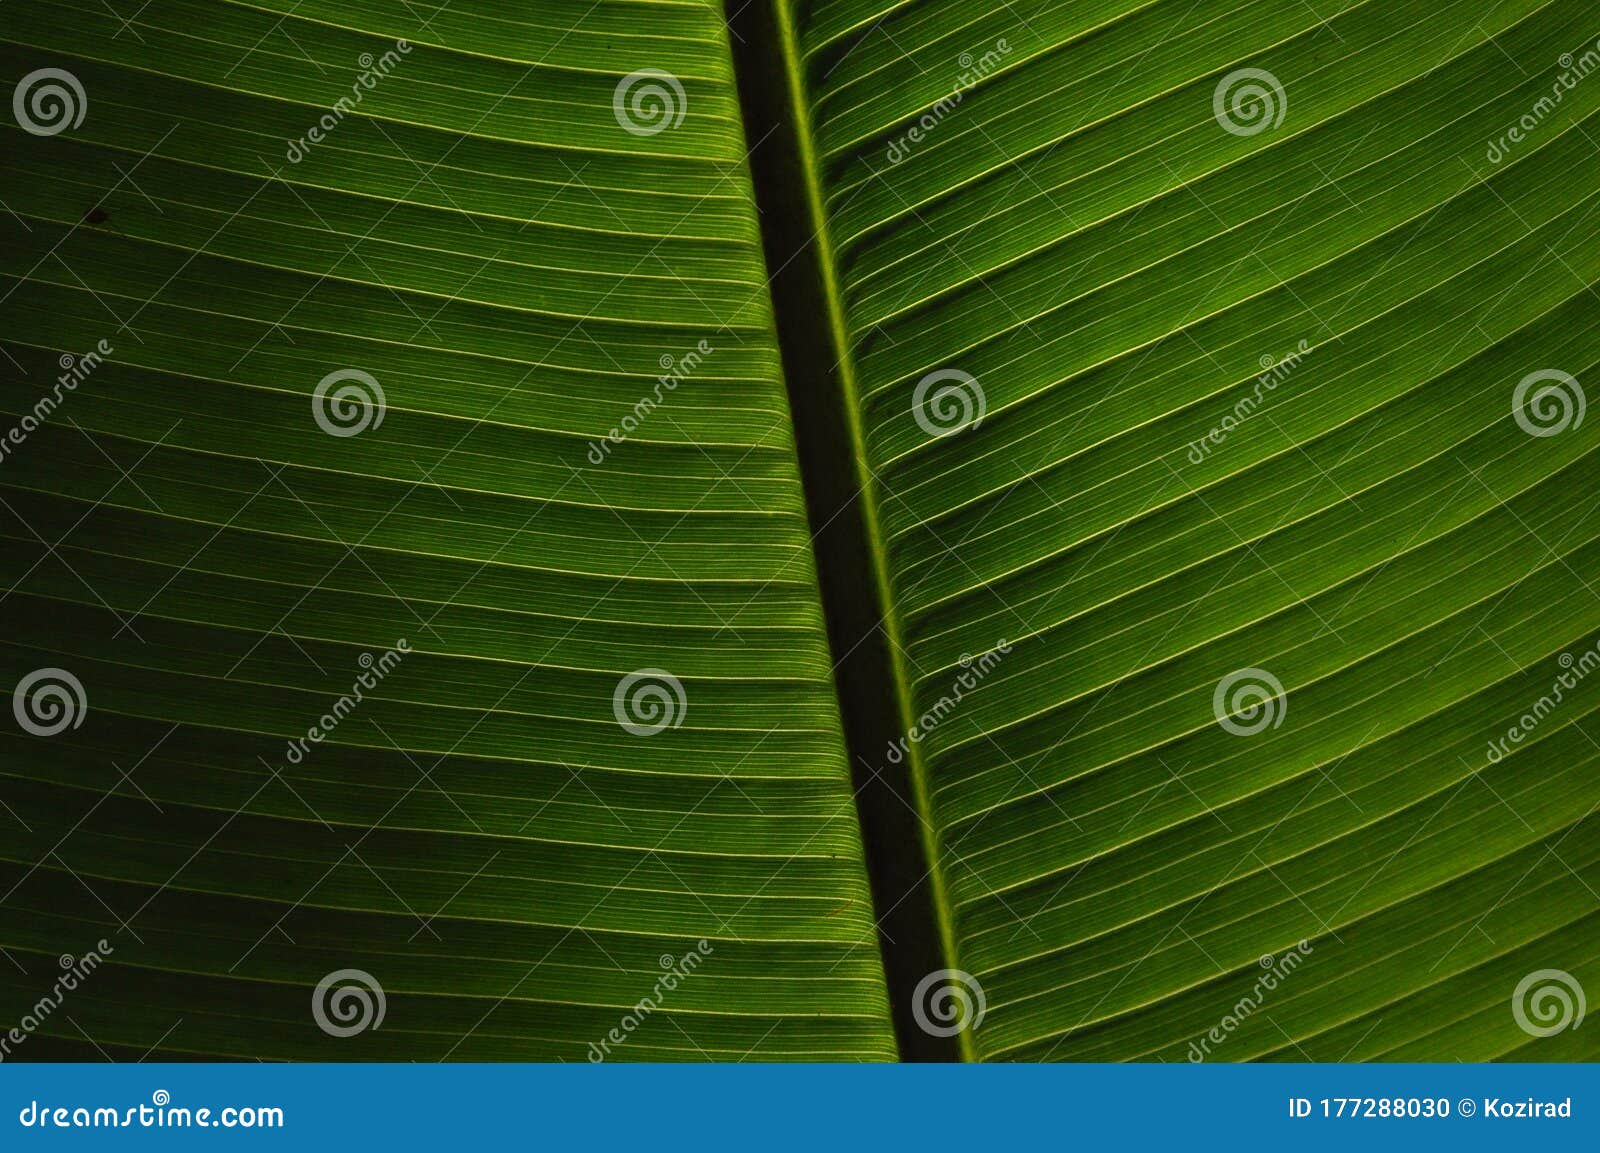 leaves of tropical plants growing in the jungle. details of the innervation of the leaf blade. nerves and connections of green